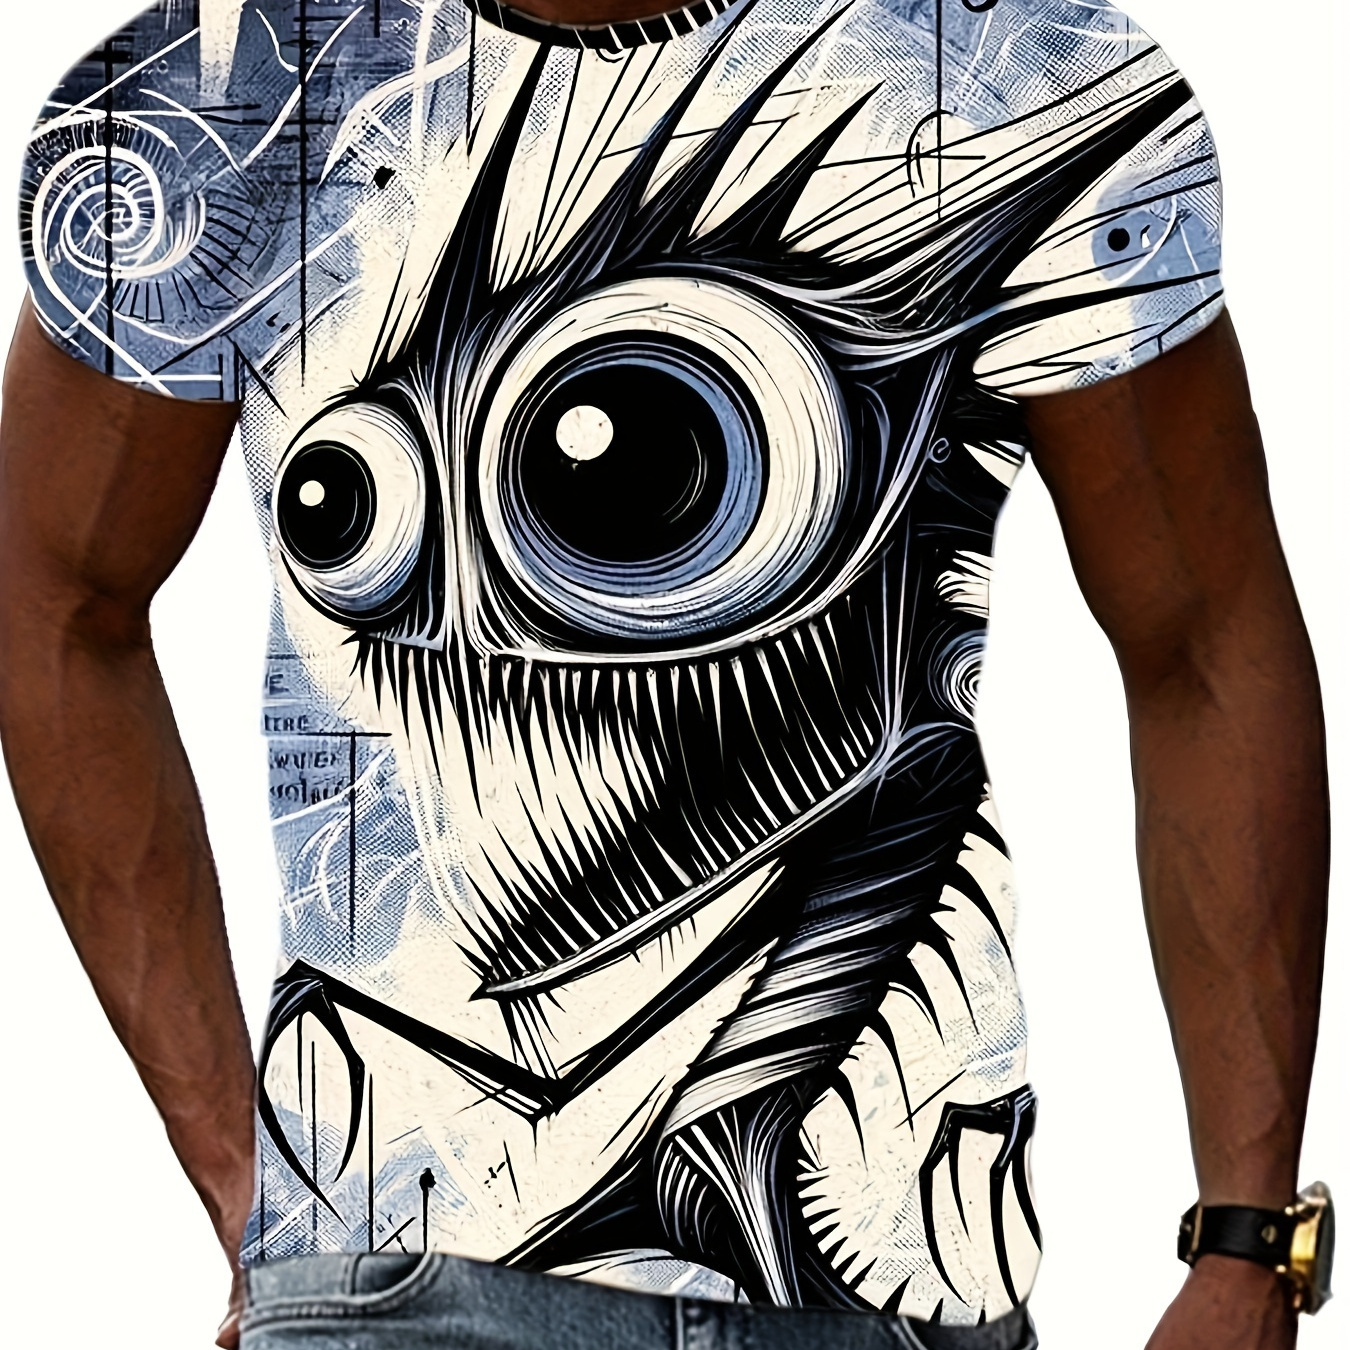 

Men's Animation Monster Pattern Print Crew Neck And Short Sleeve T-shirt, Novel And Stylish Tops For Men, Suitable For Summer Leisurewear And Outdoors Activities